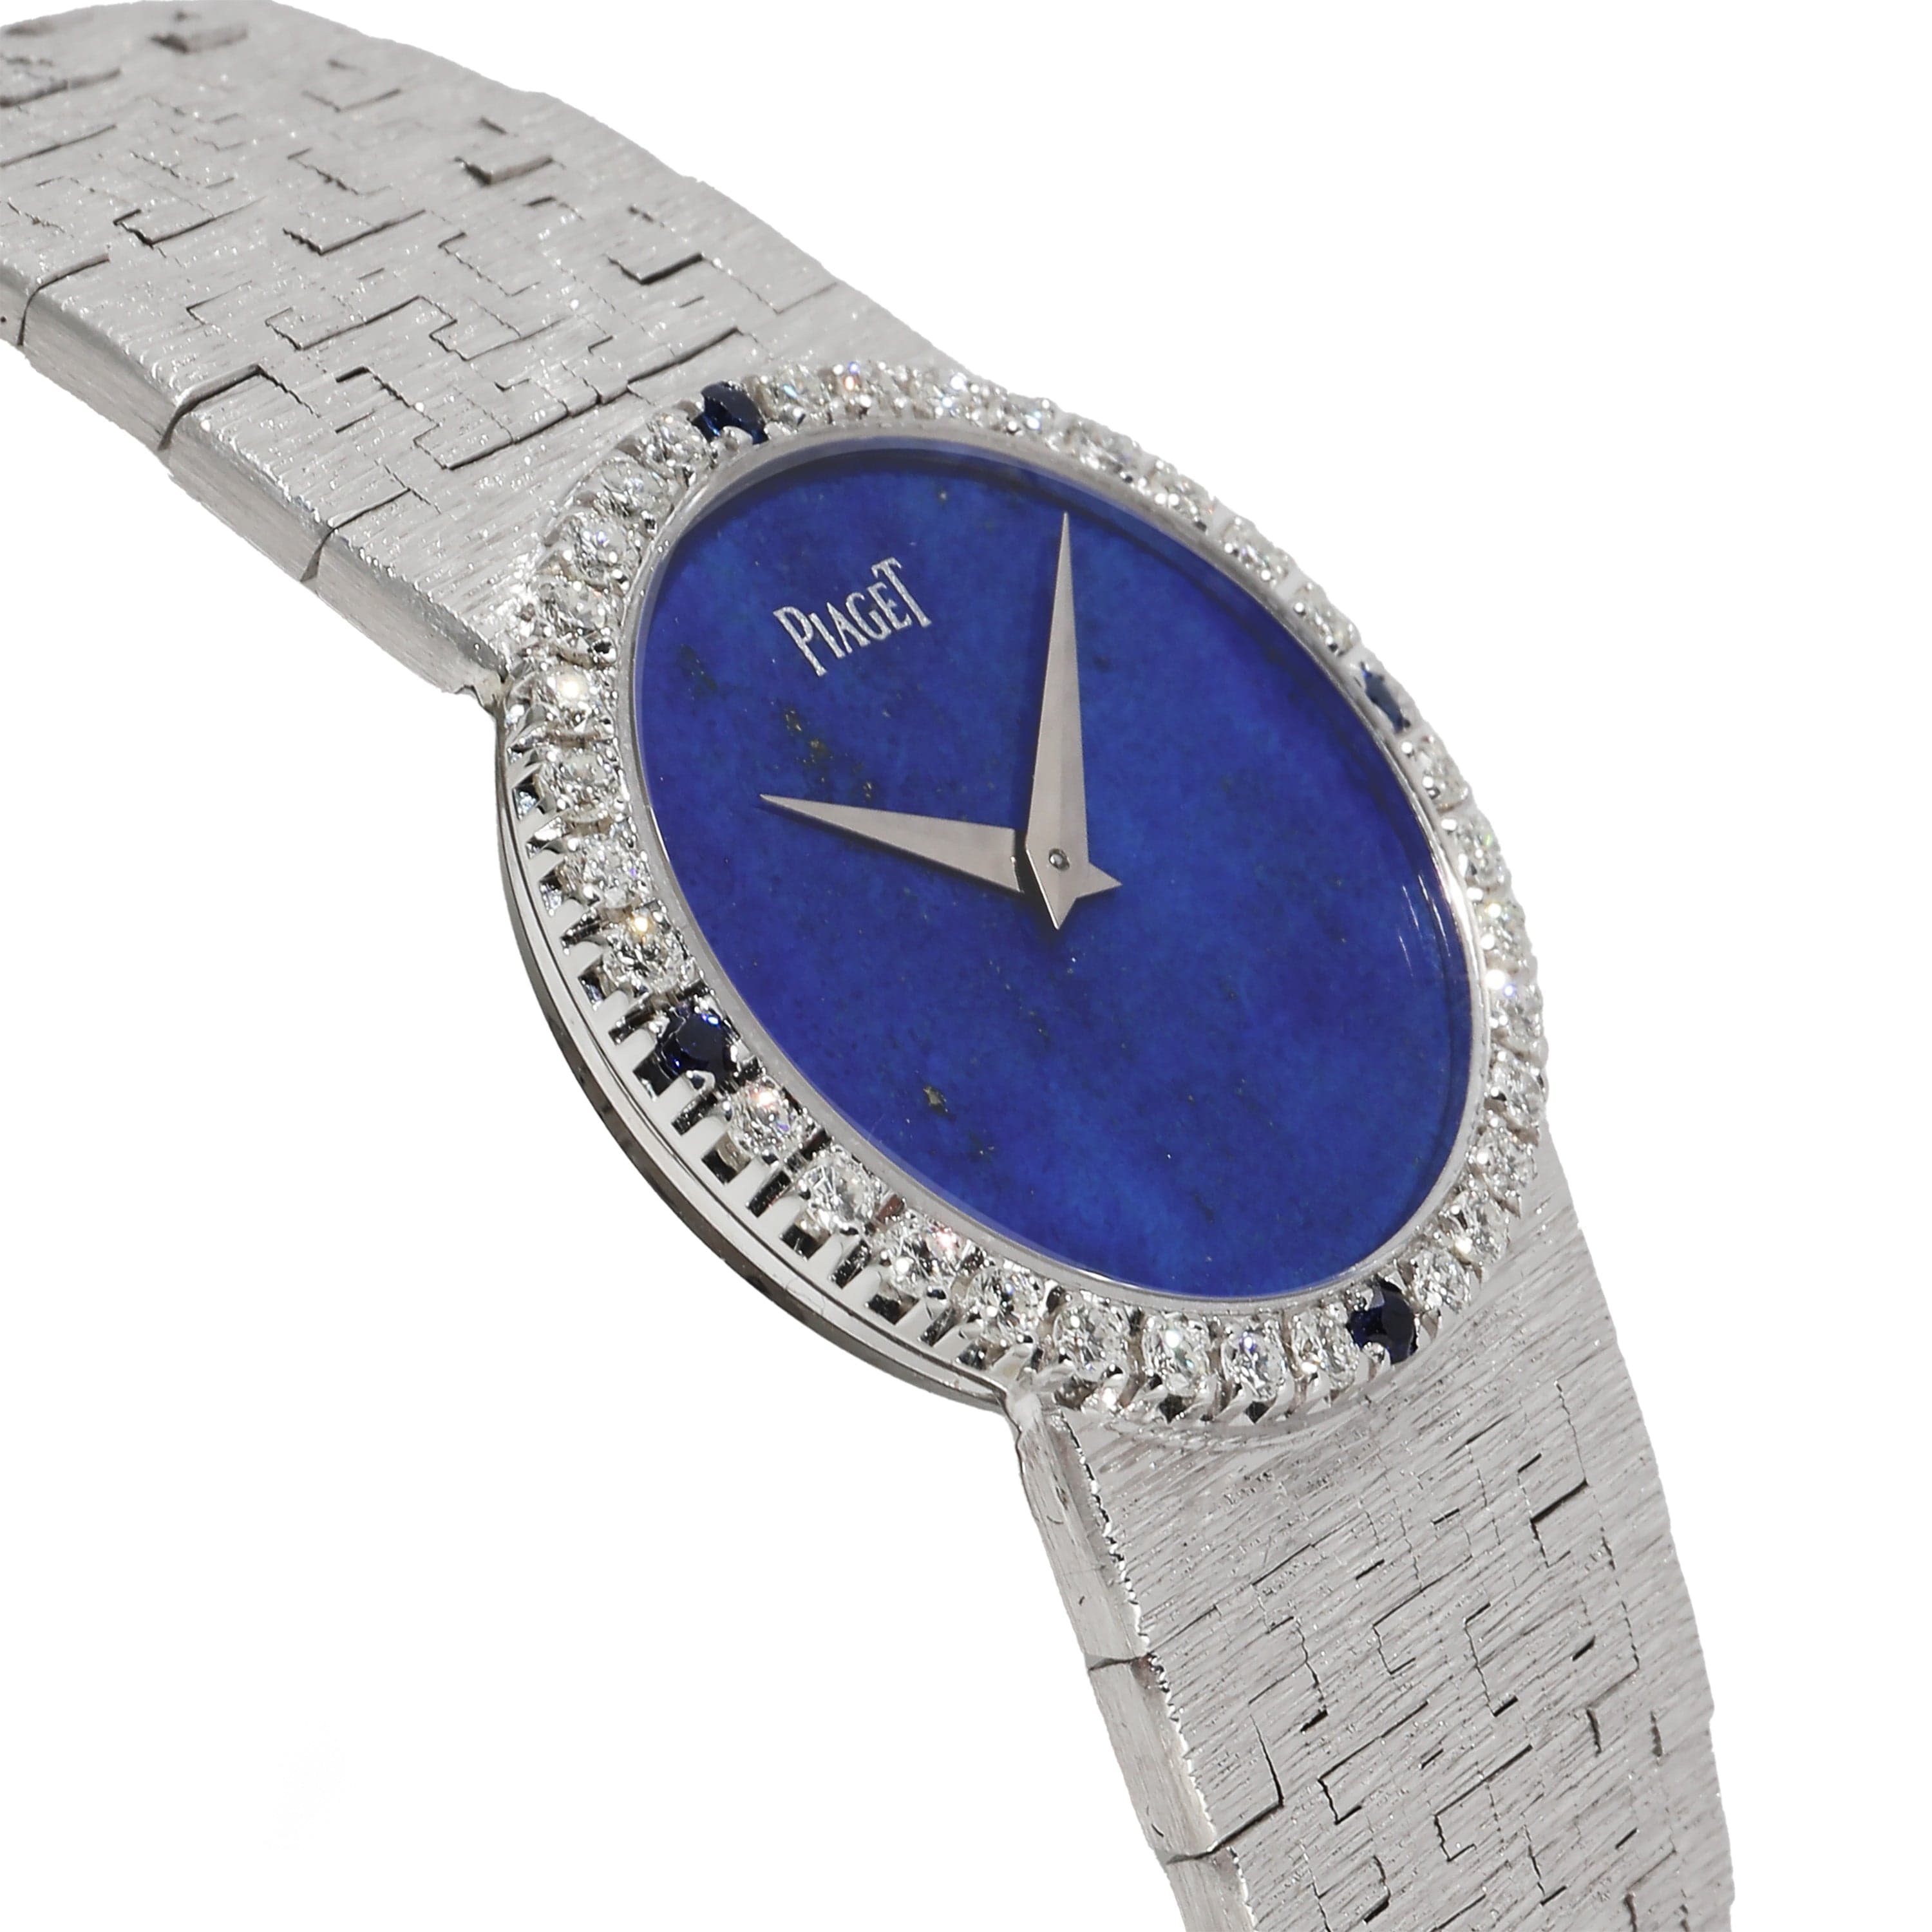 Piaget Piaget Classique 9706 A6 Women's Watch in 18kt White Gold